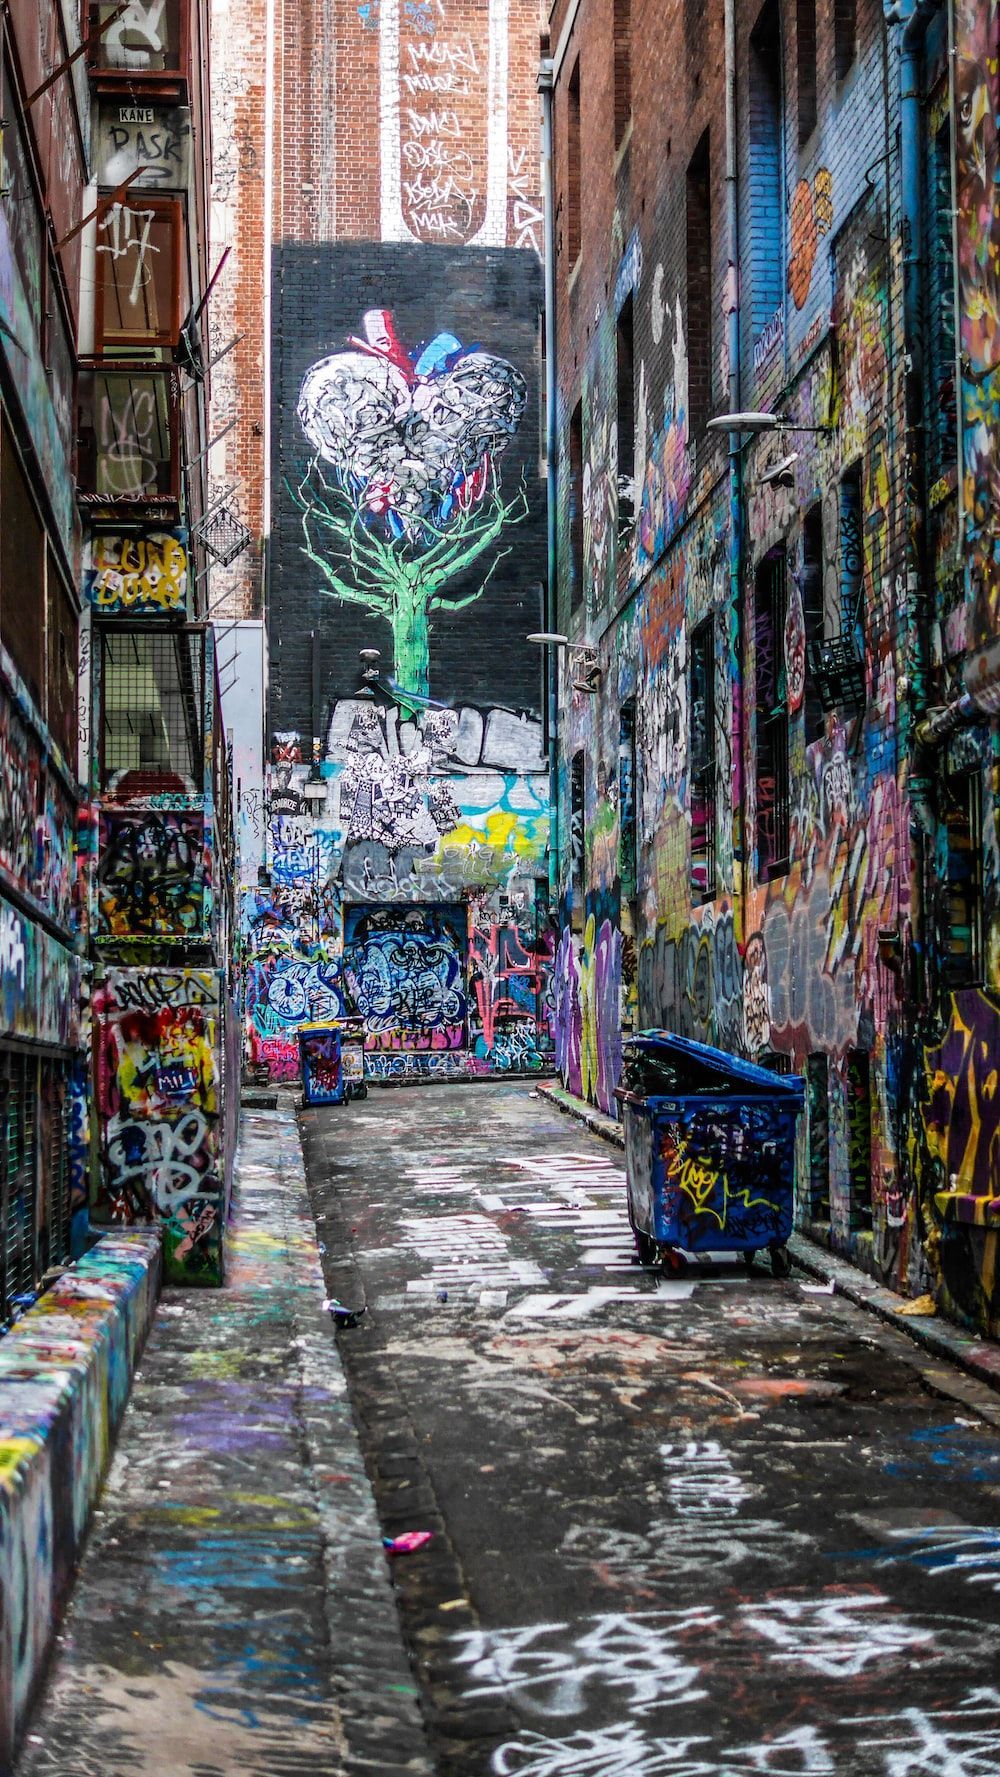 An alleyway with walls covered in graffiti - Graffiti, street art